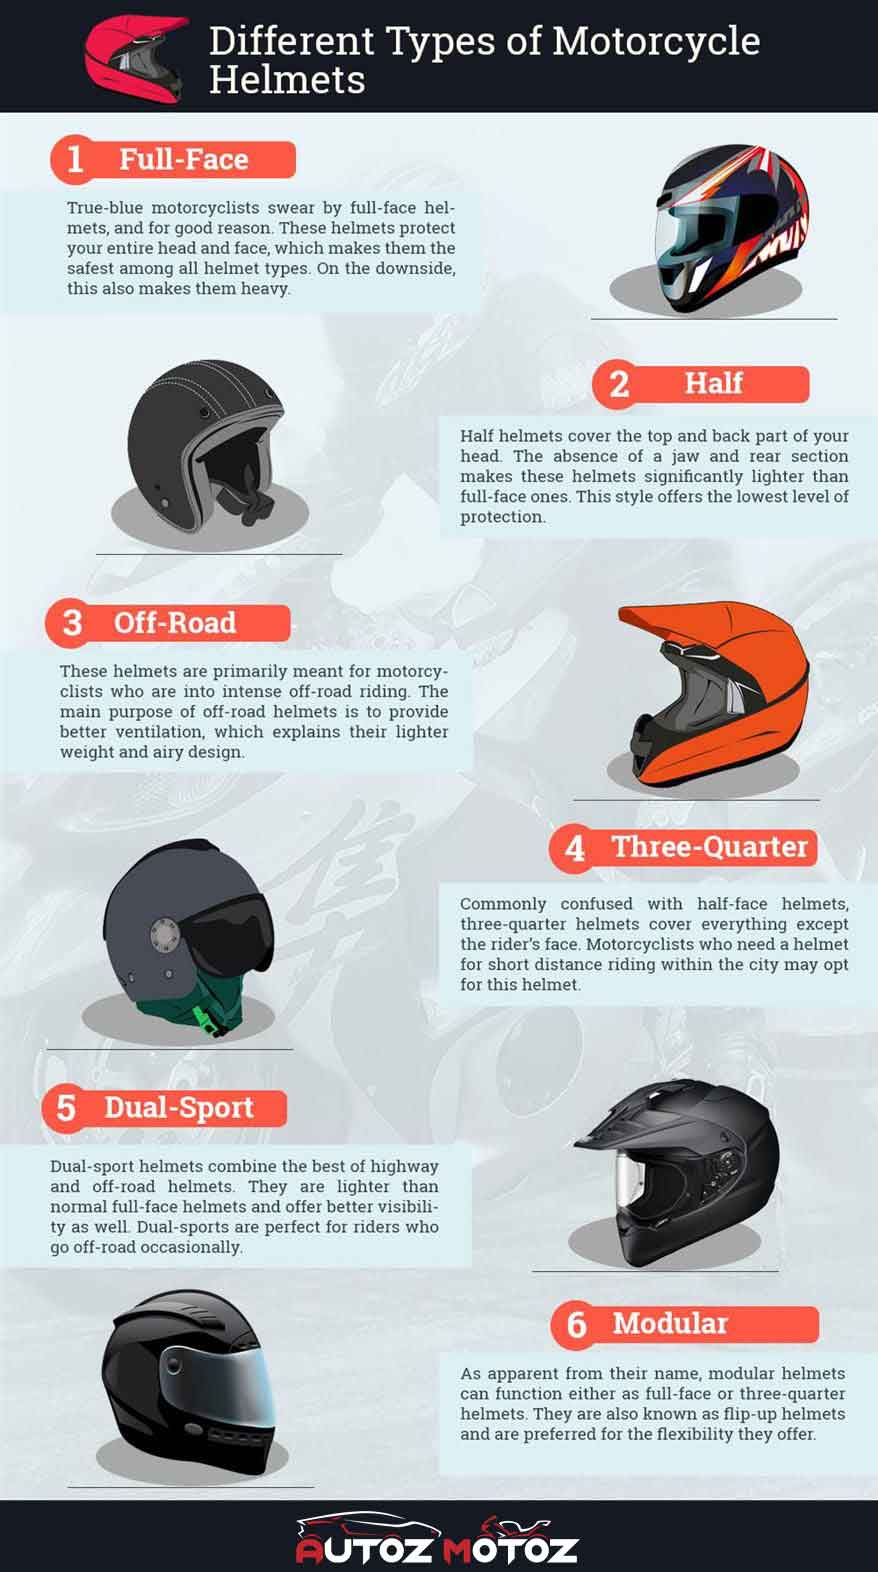 How To Find The Right Size Motorcycle Helmet - Motorcycle for Life